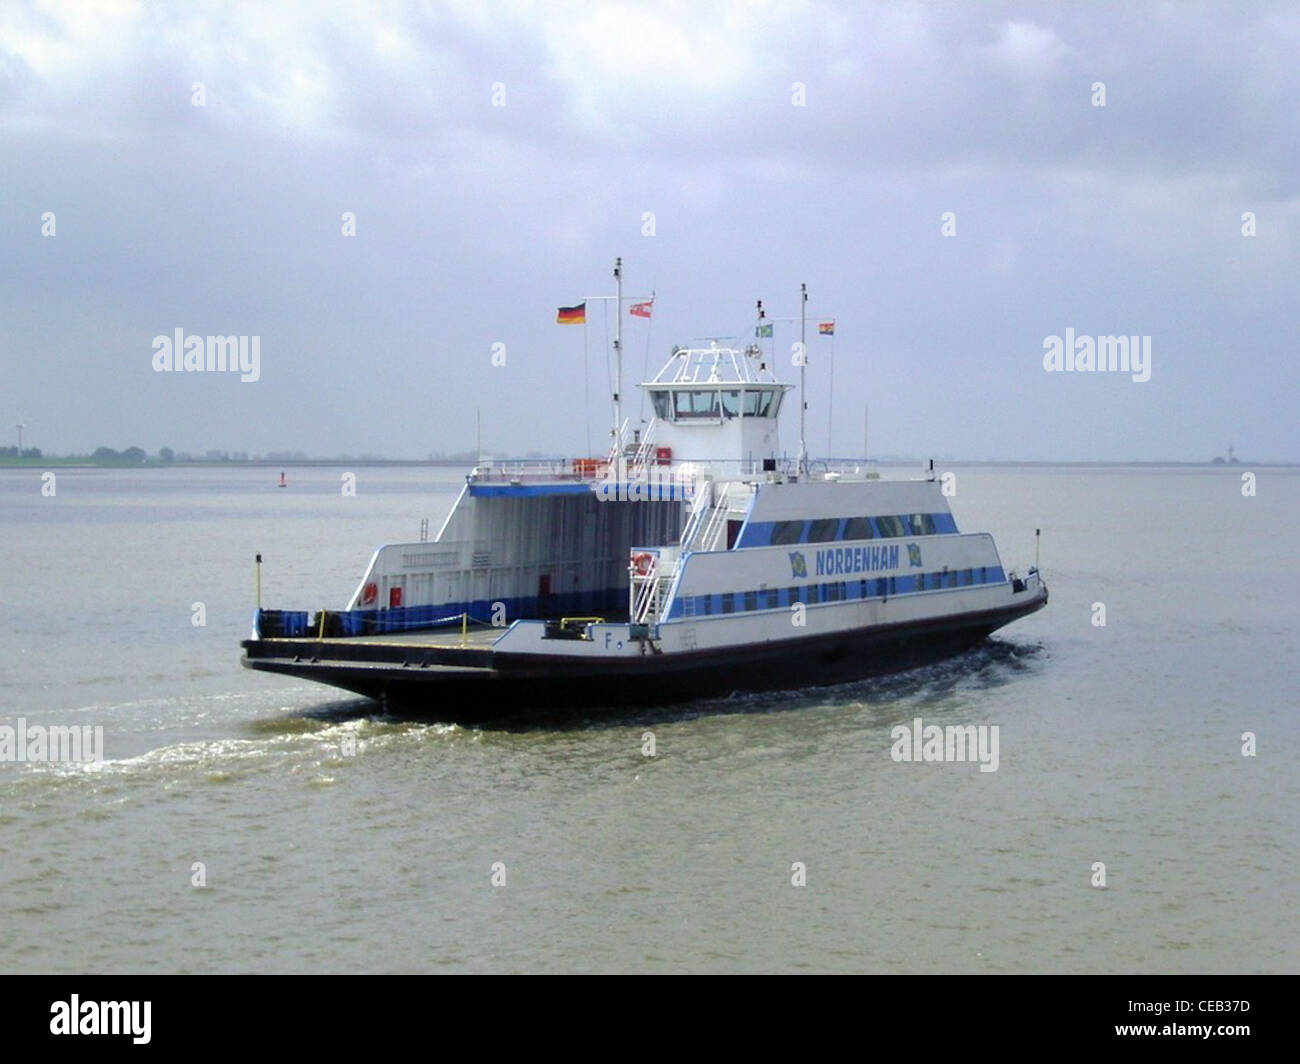 The Weser ferry Nordenham on its way from Bremerhaven to Nordenham Stock Photo